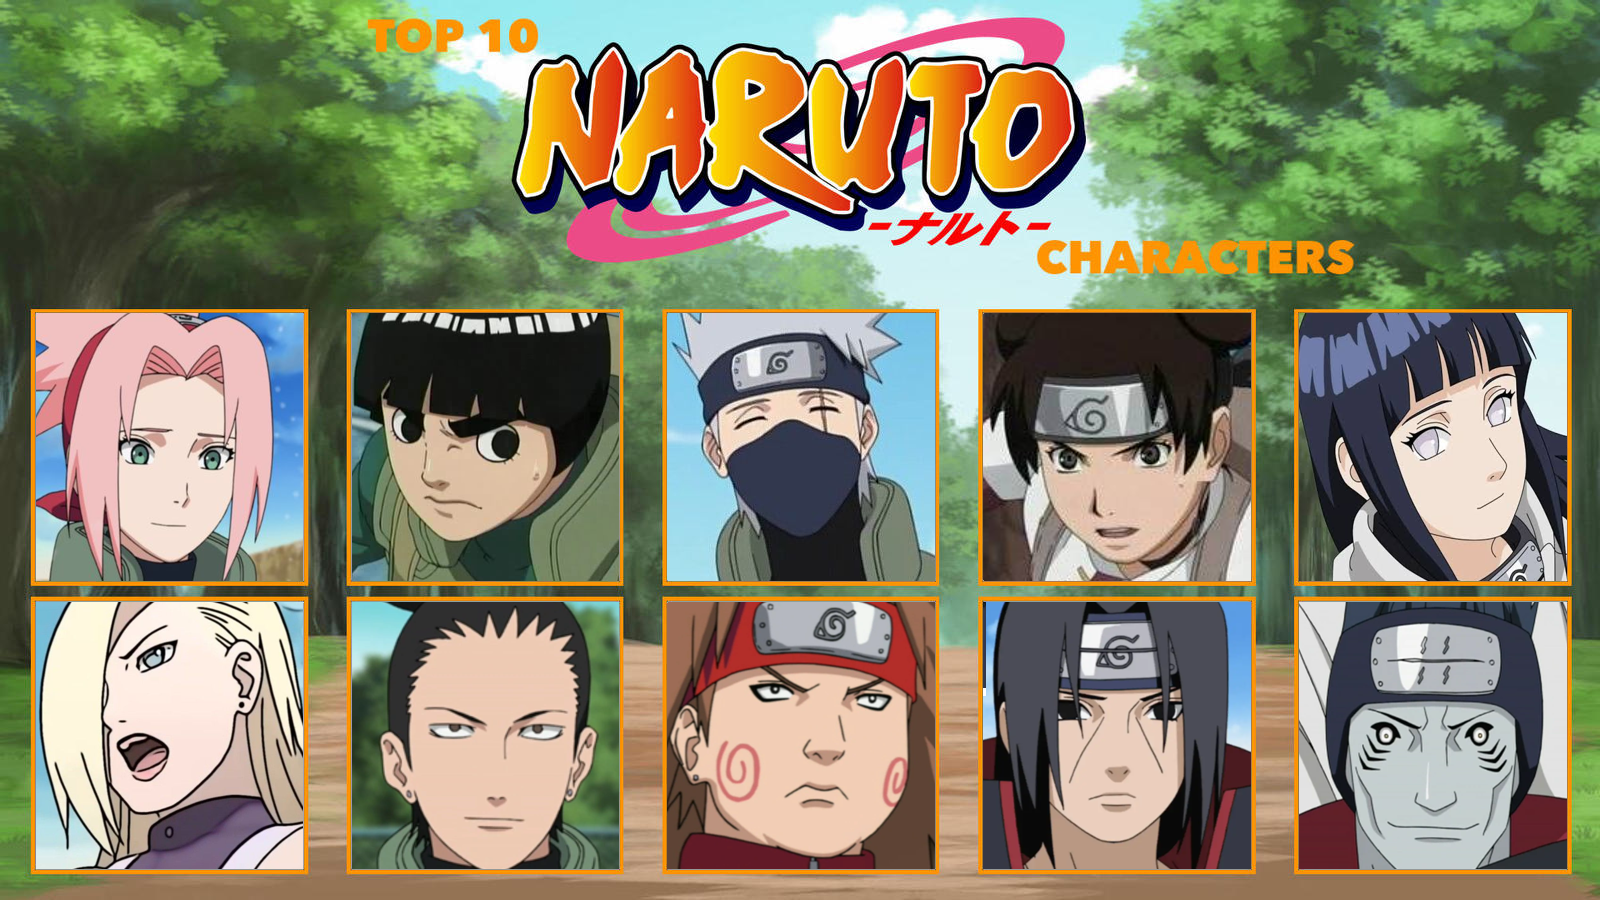 My Top 10 Favourite Naruto Characters